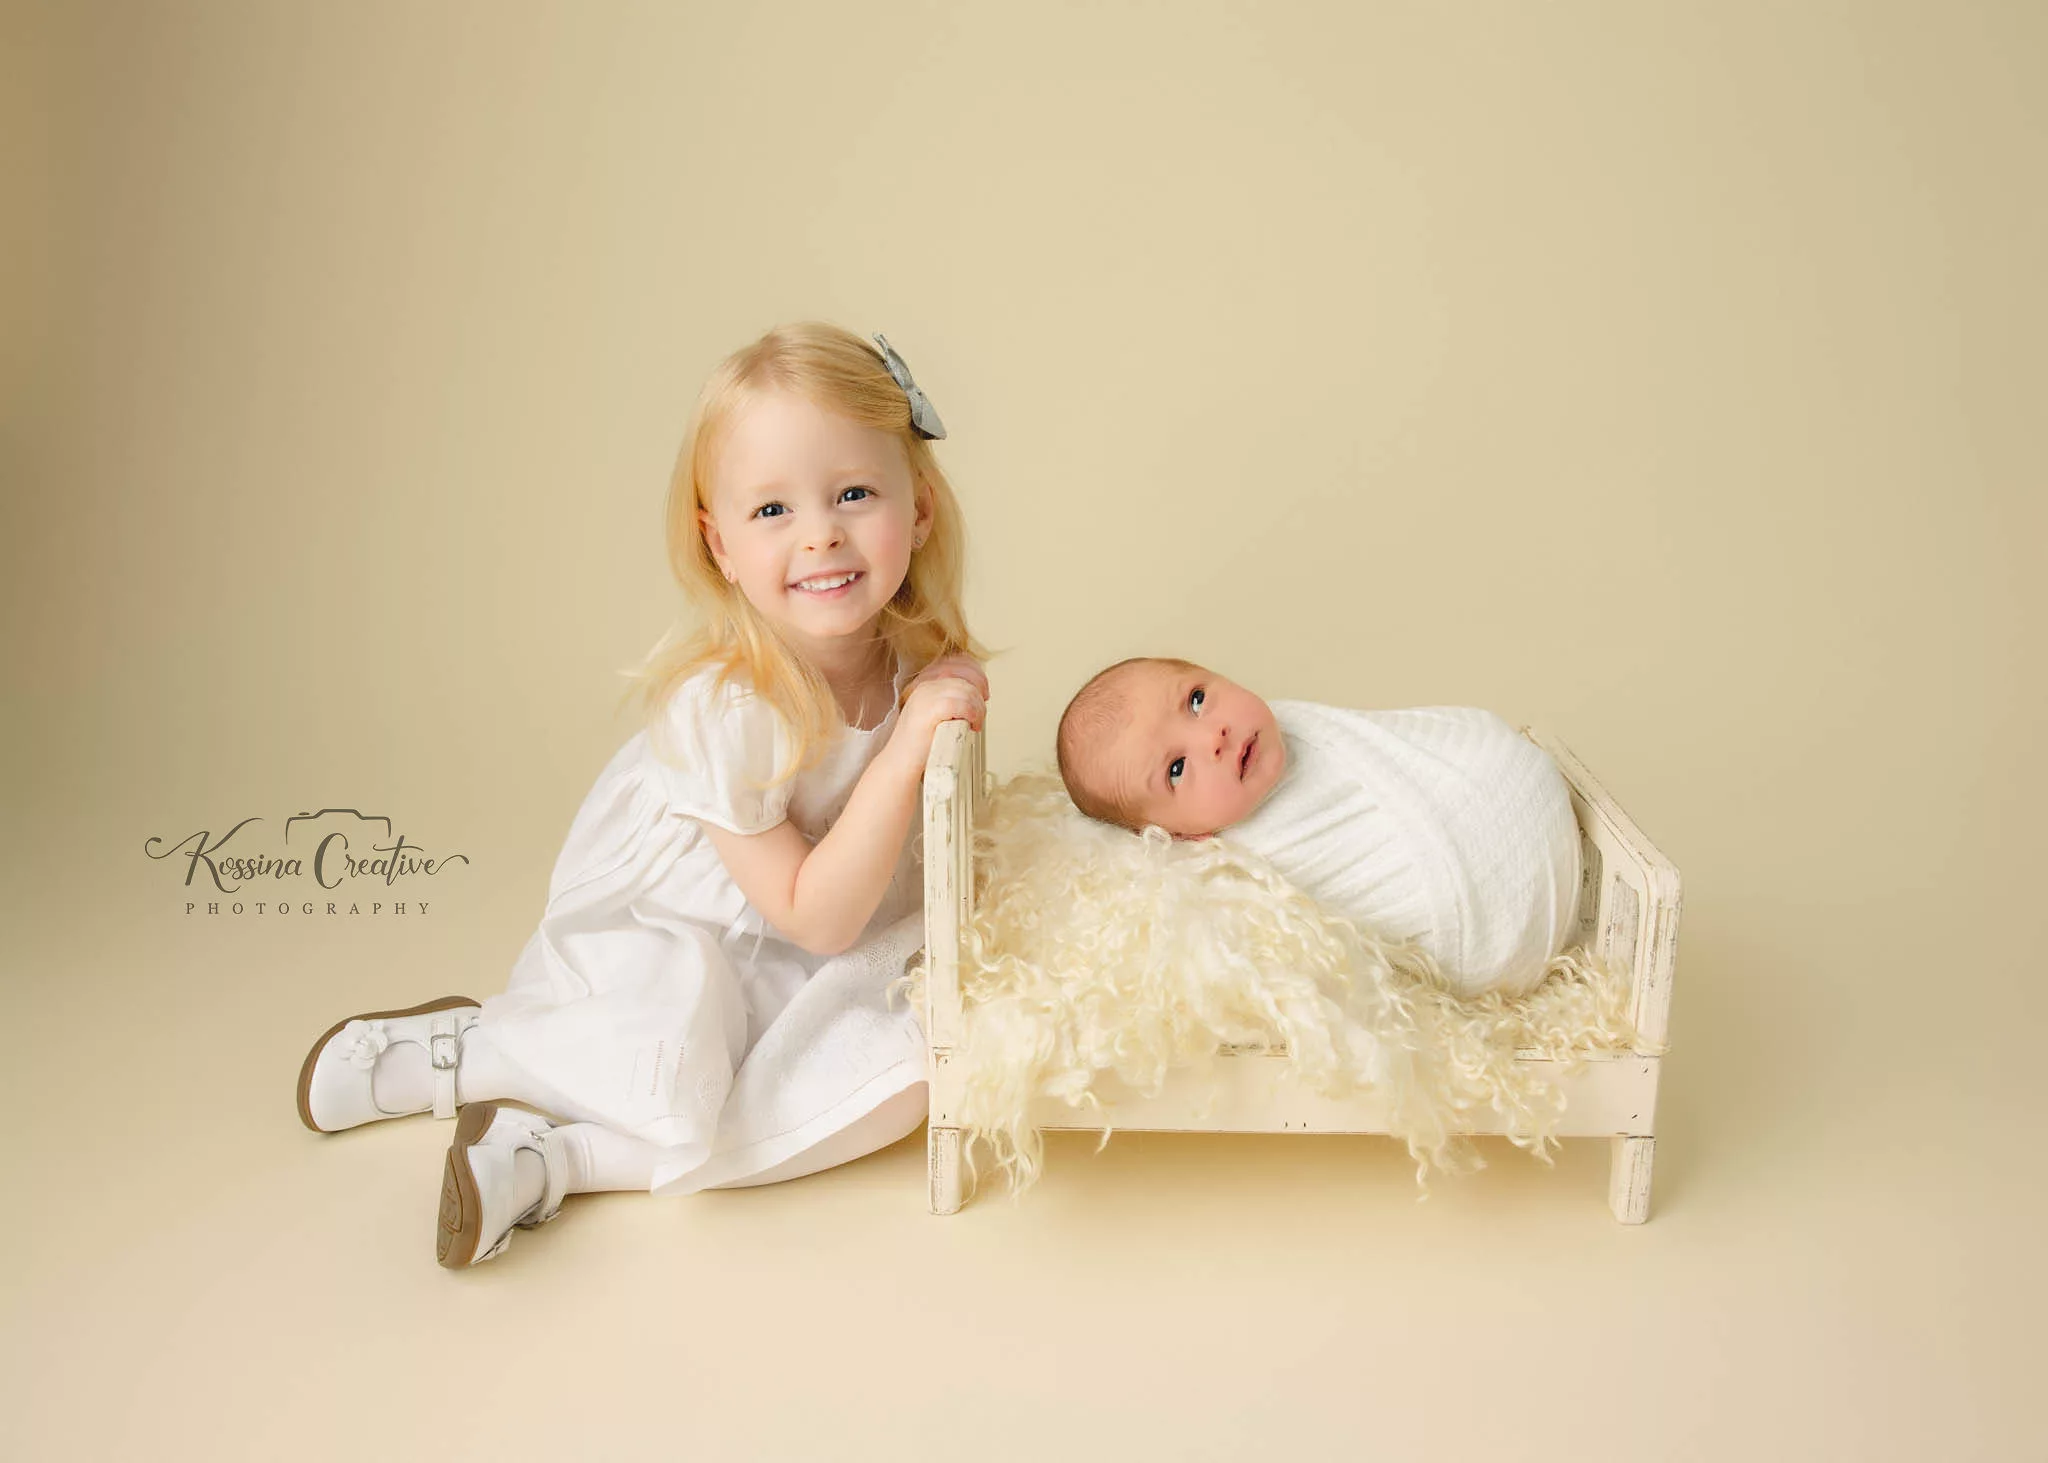 Orlando Family Newborn Photographer Baby Kid Photo studio siblings big sister little brother cream bed white clothing